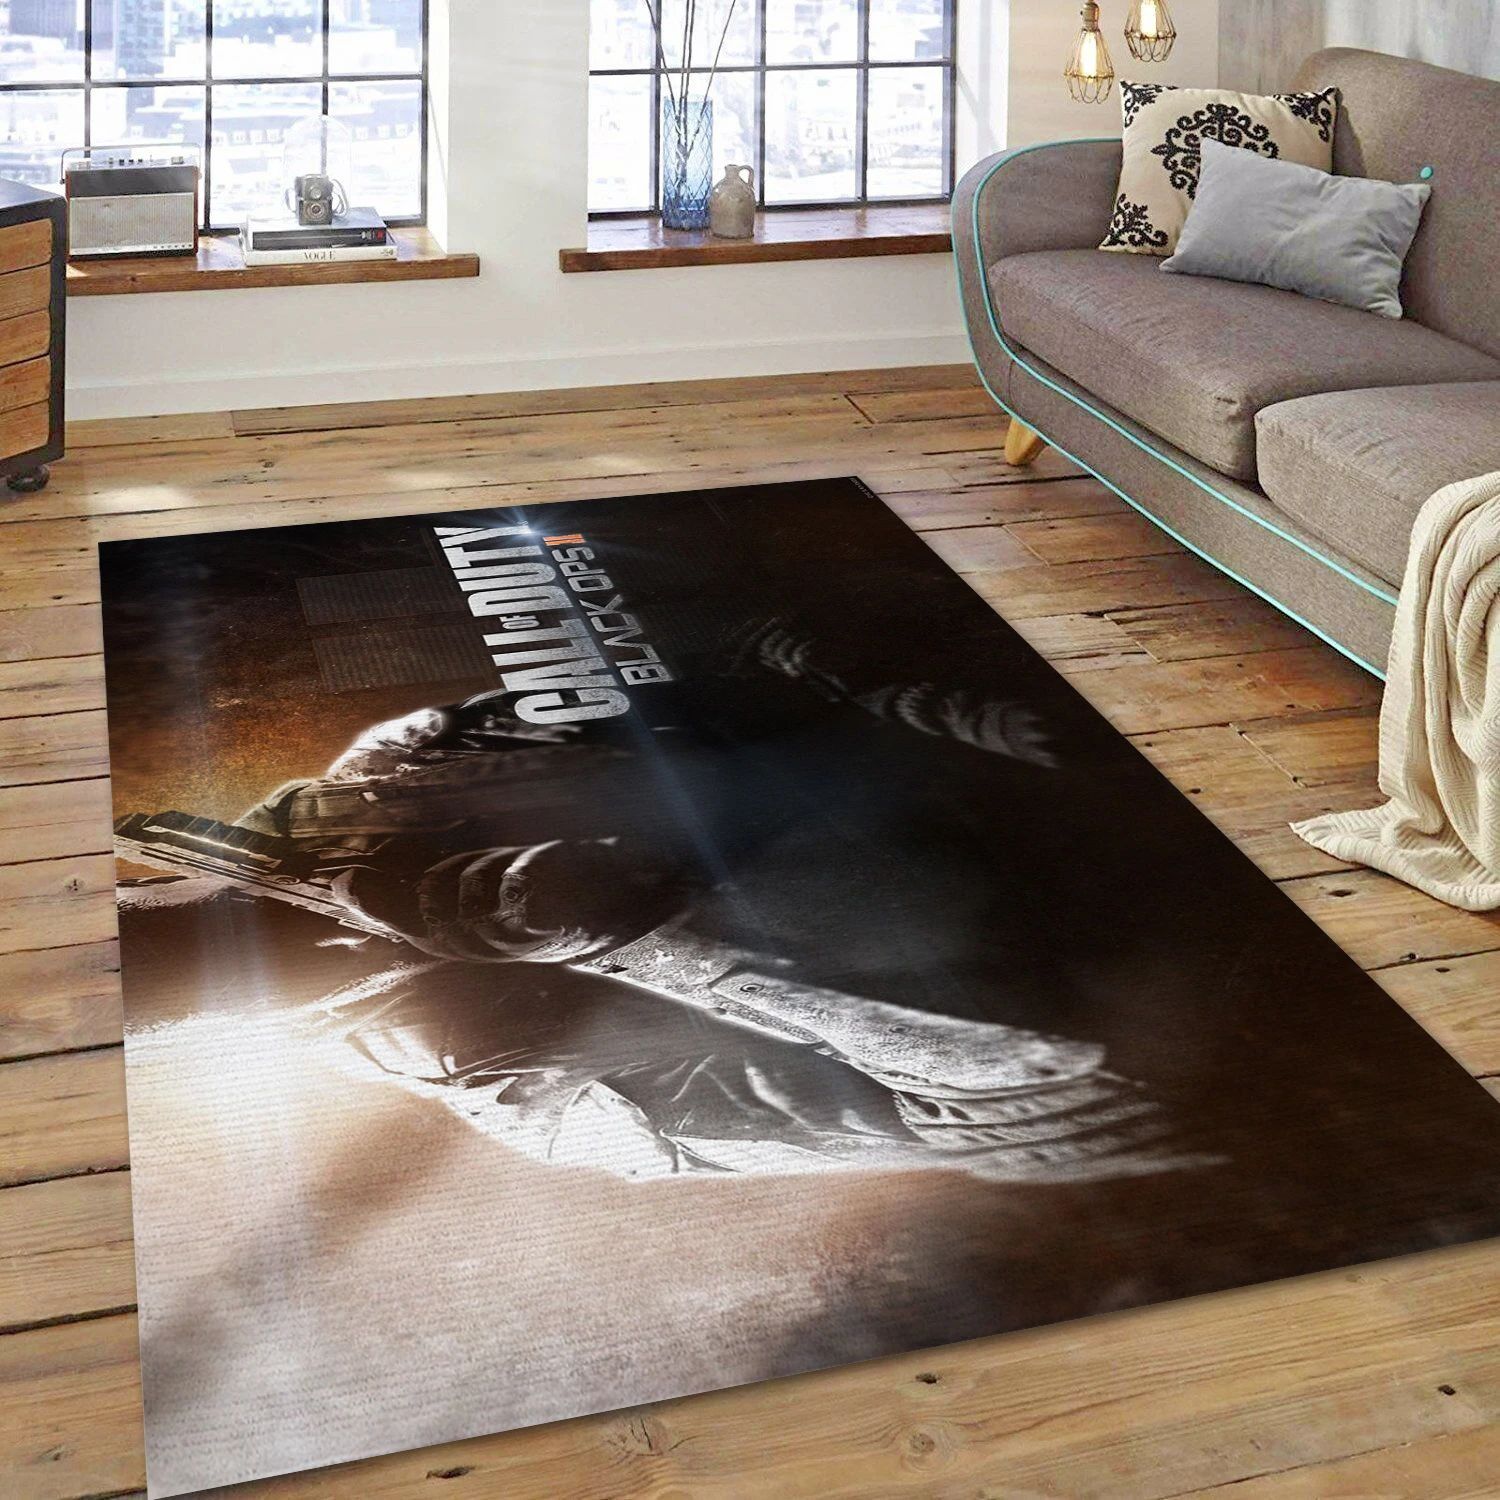 Call Of Duty Black Ops 2 Video Game Area Rug Area, Living Room Rug - Home Decor Floor Decor - Indoor Outdoor Rugs